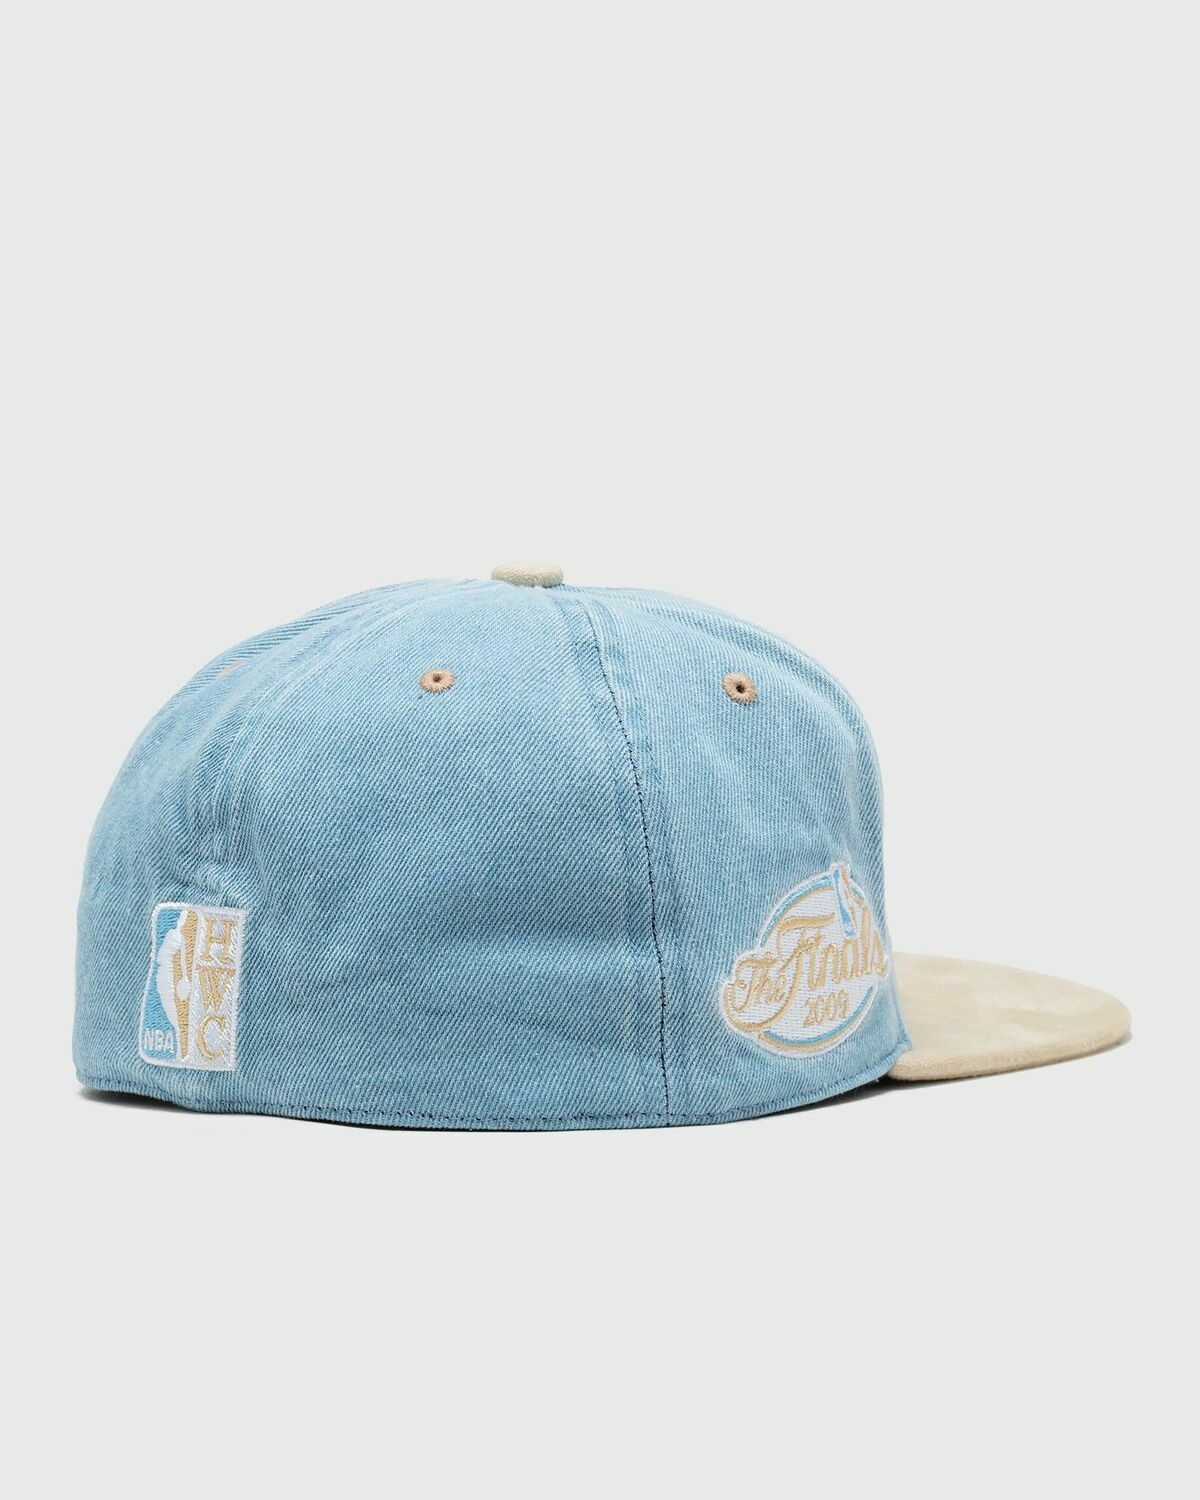 Mitchell & Ness Nba Blue Jean Baby Fitted Hwc Lakers Blue/Beige - Mens - Caps